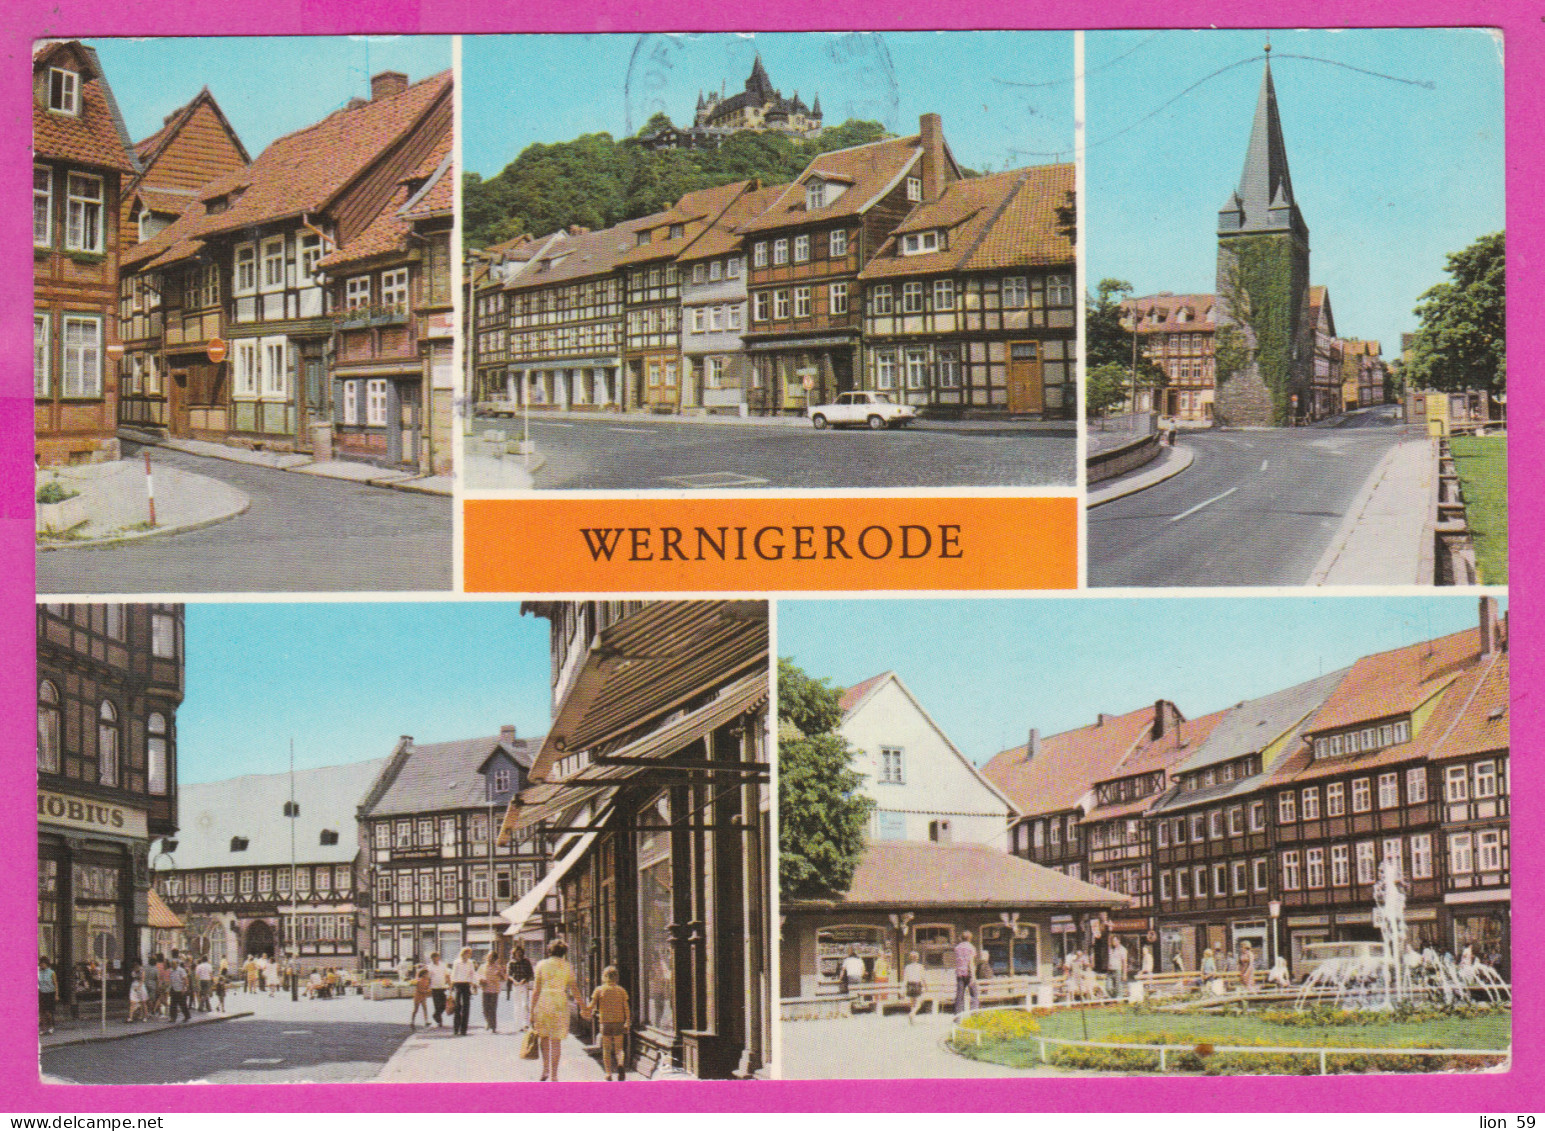 292940 / Germany DDR Wernigerode Hotel FeodalMuseum Schloss PC USED 1982 -10 Pf. Shooting (Schießen) Sports , Slogan - Shooting (Weapons)